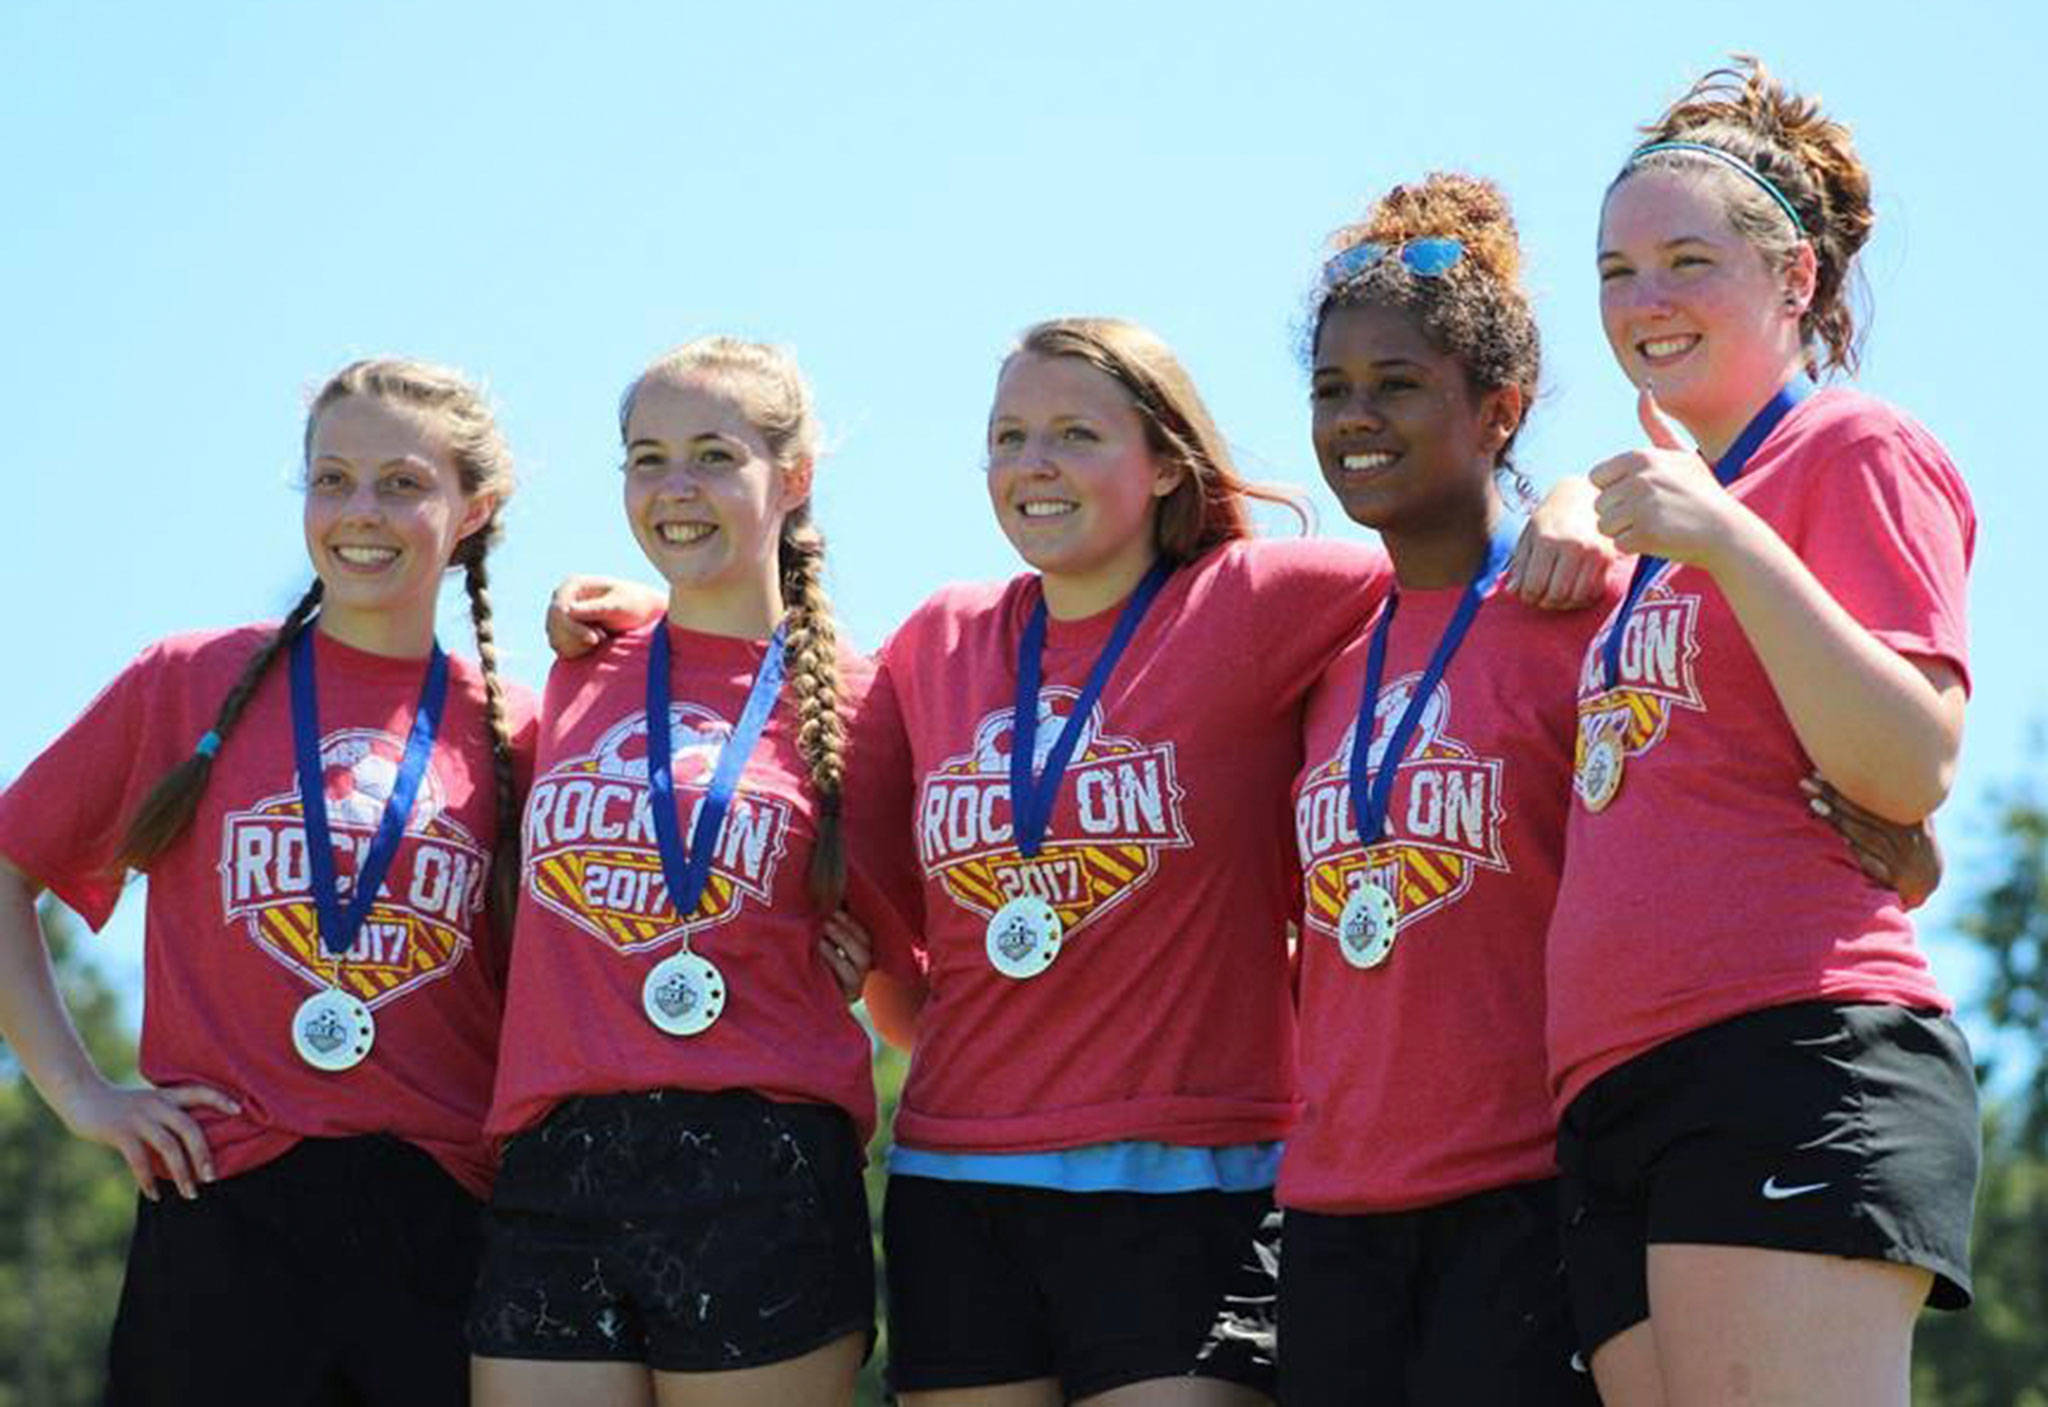 Oak Harbor’s Indecisive won the high school girls division. (Photo by Trina Coe)